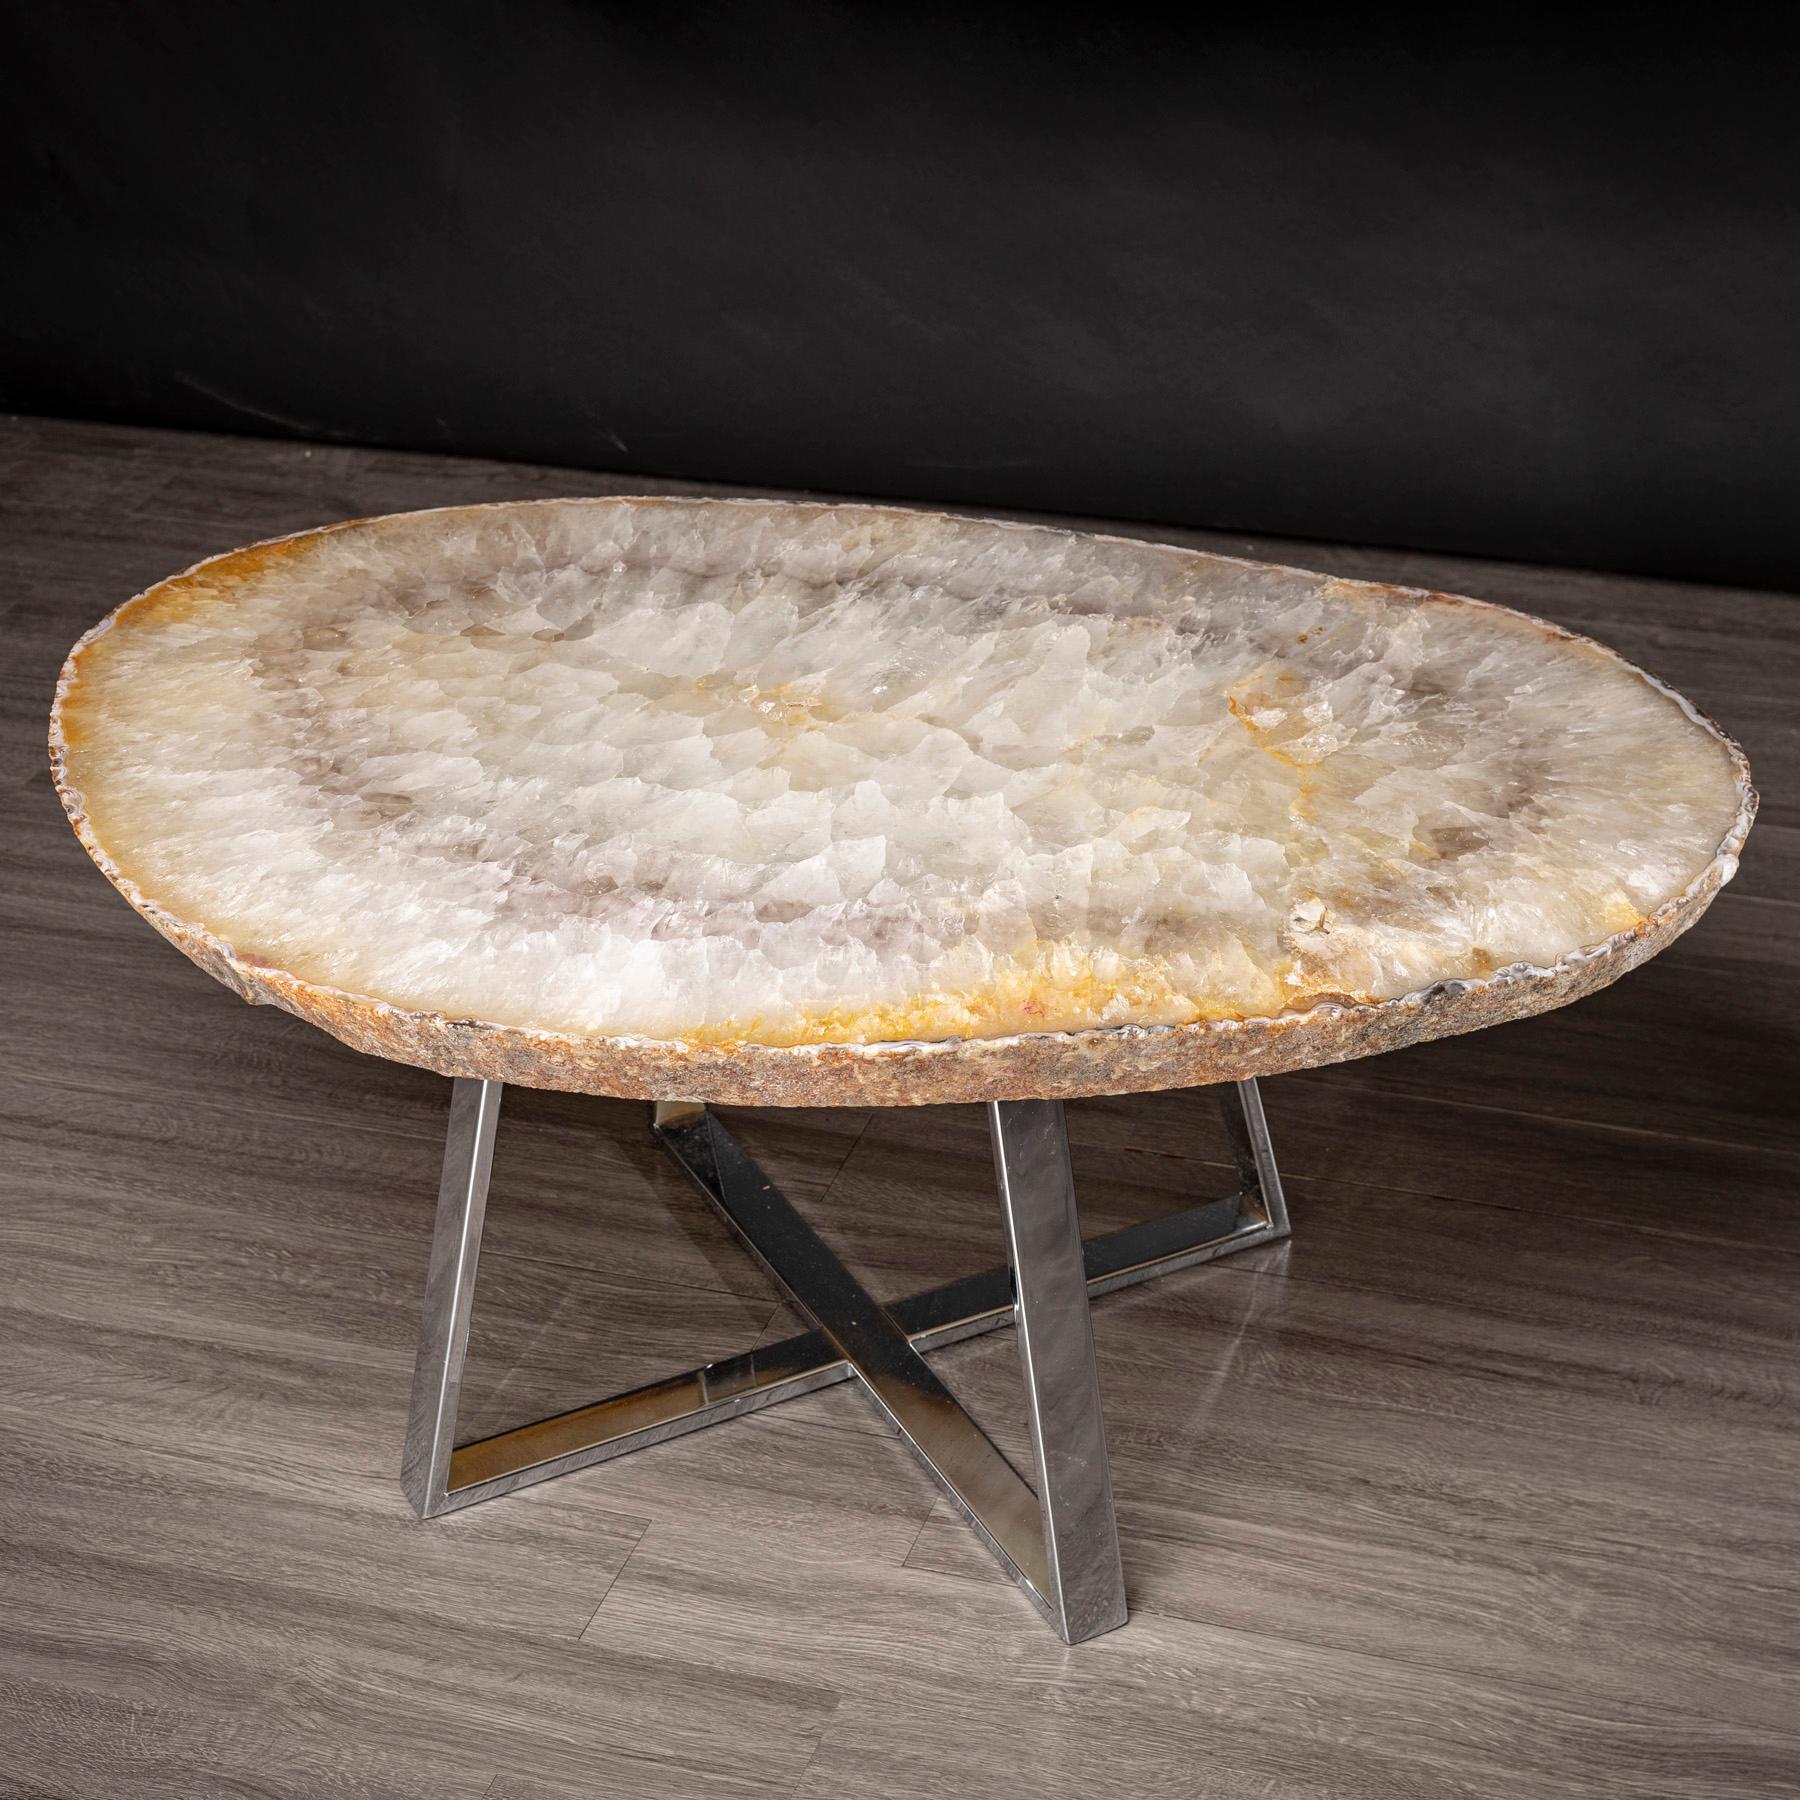 This agate slab forming a side table or cocktail table, is from Brazil and has a combination of colors with hints of grey and white. Agates are formed in rounded nodules, which are sliced open to bring out the internal pattern hidden in the stone.